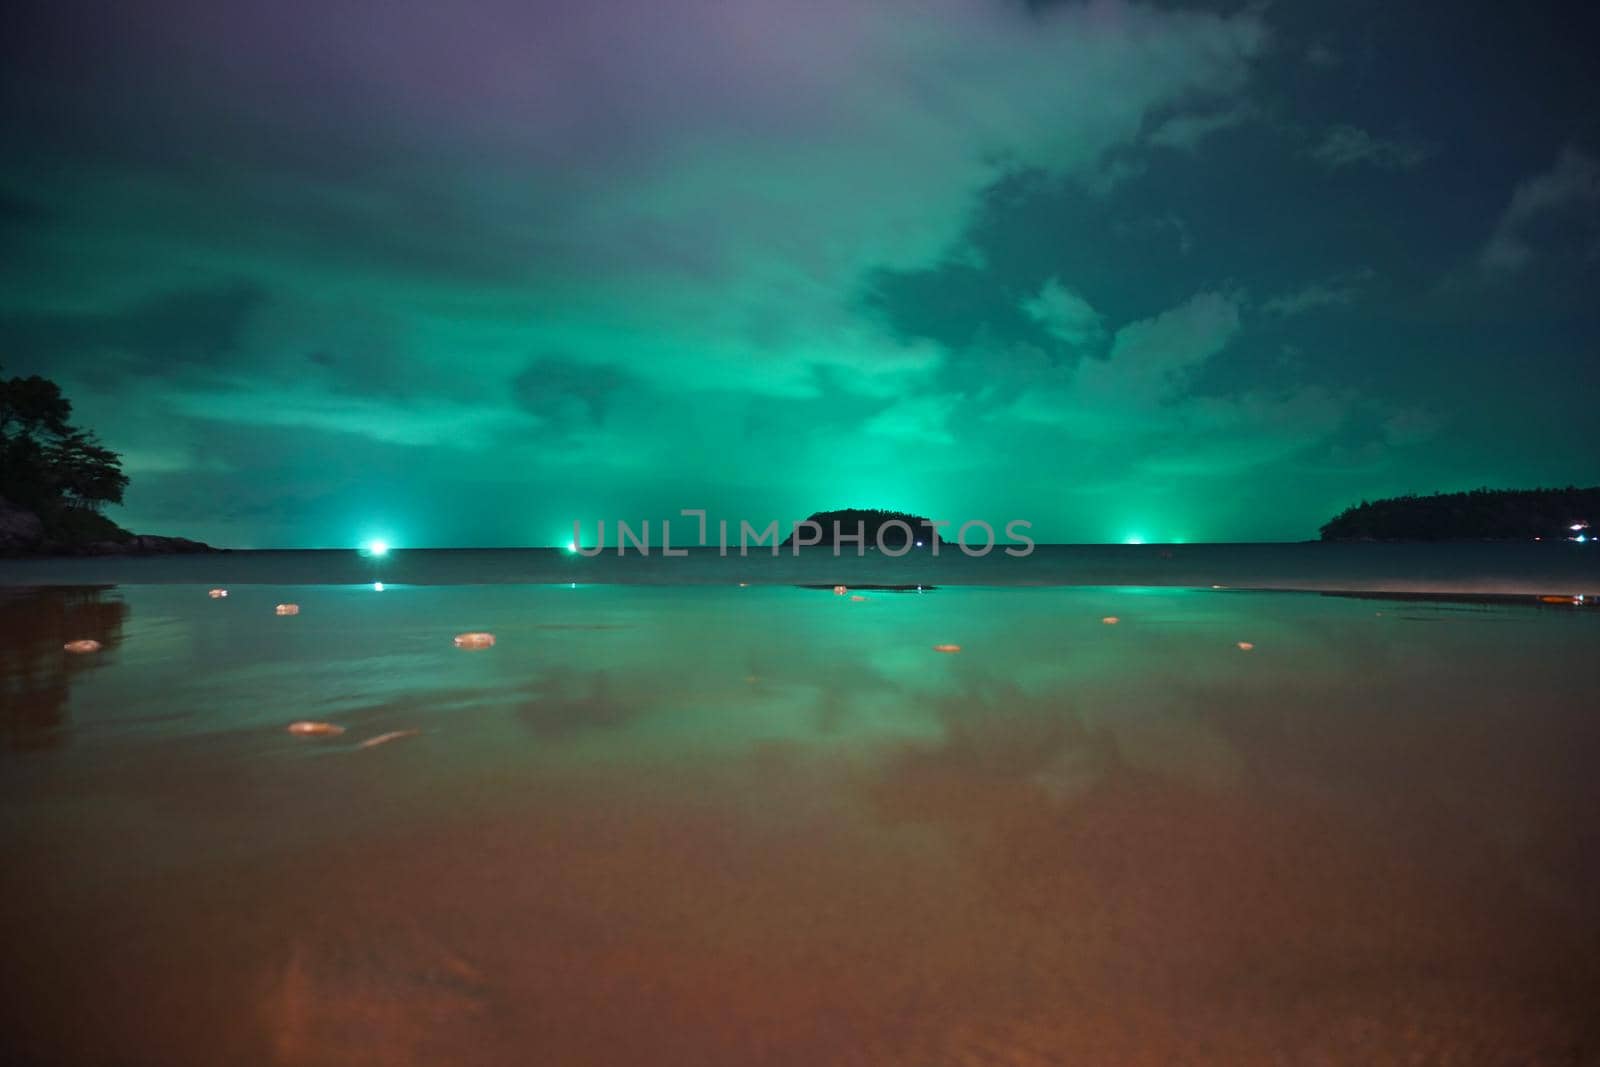 Unusual green illumination of the sky over the island. Clouds of green-purple color are reflected in the ocean, in the water and on wet sand. In distance there is an island, palm trees and lanterns